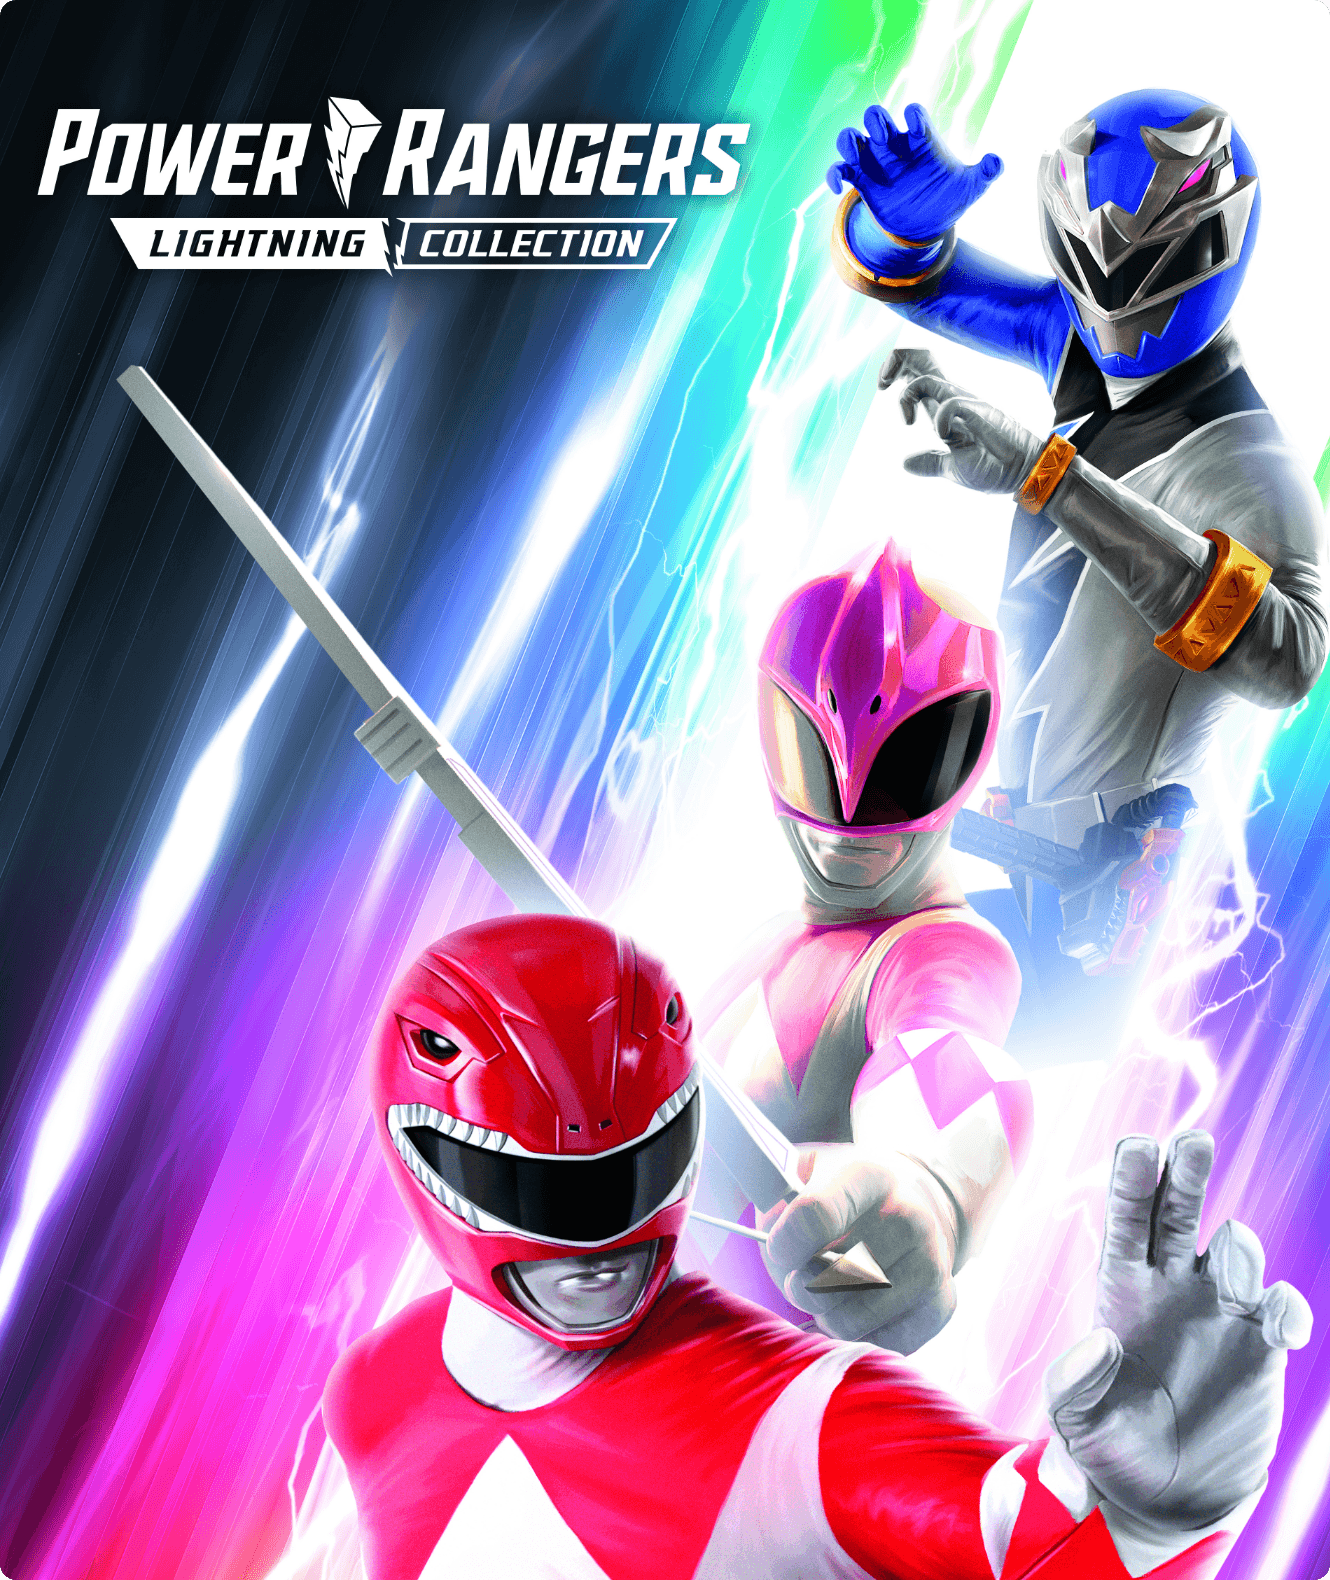 Power Rangers Lightning collection